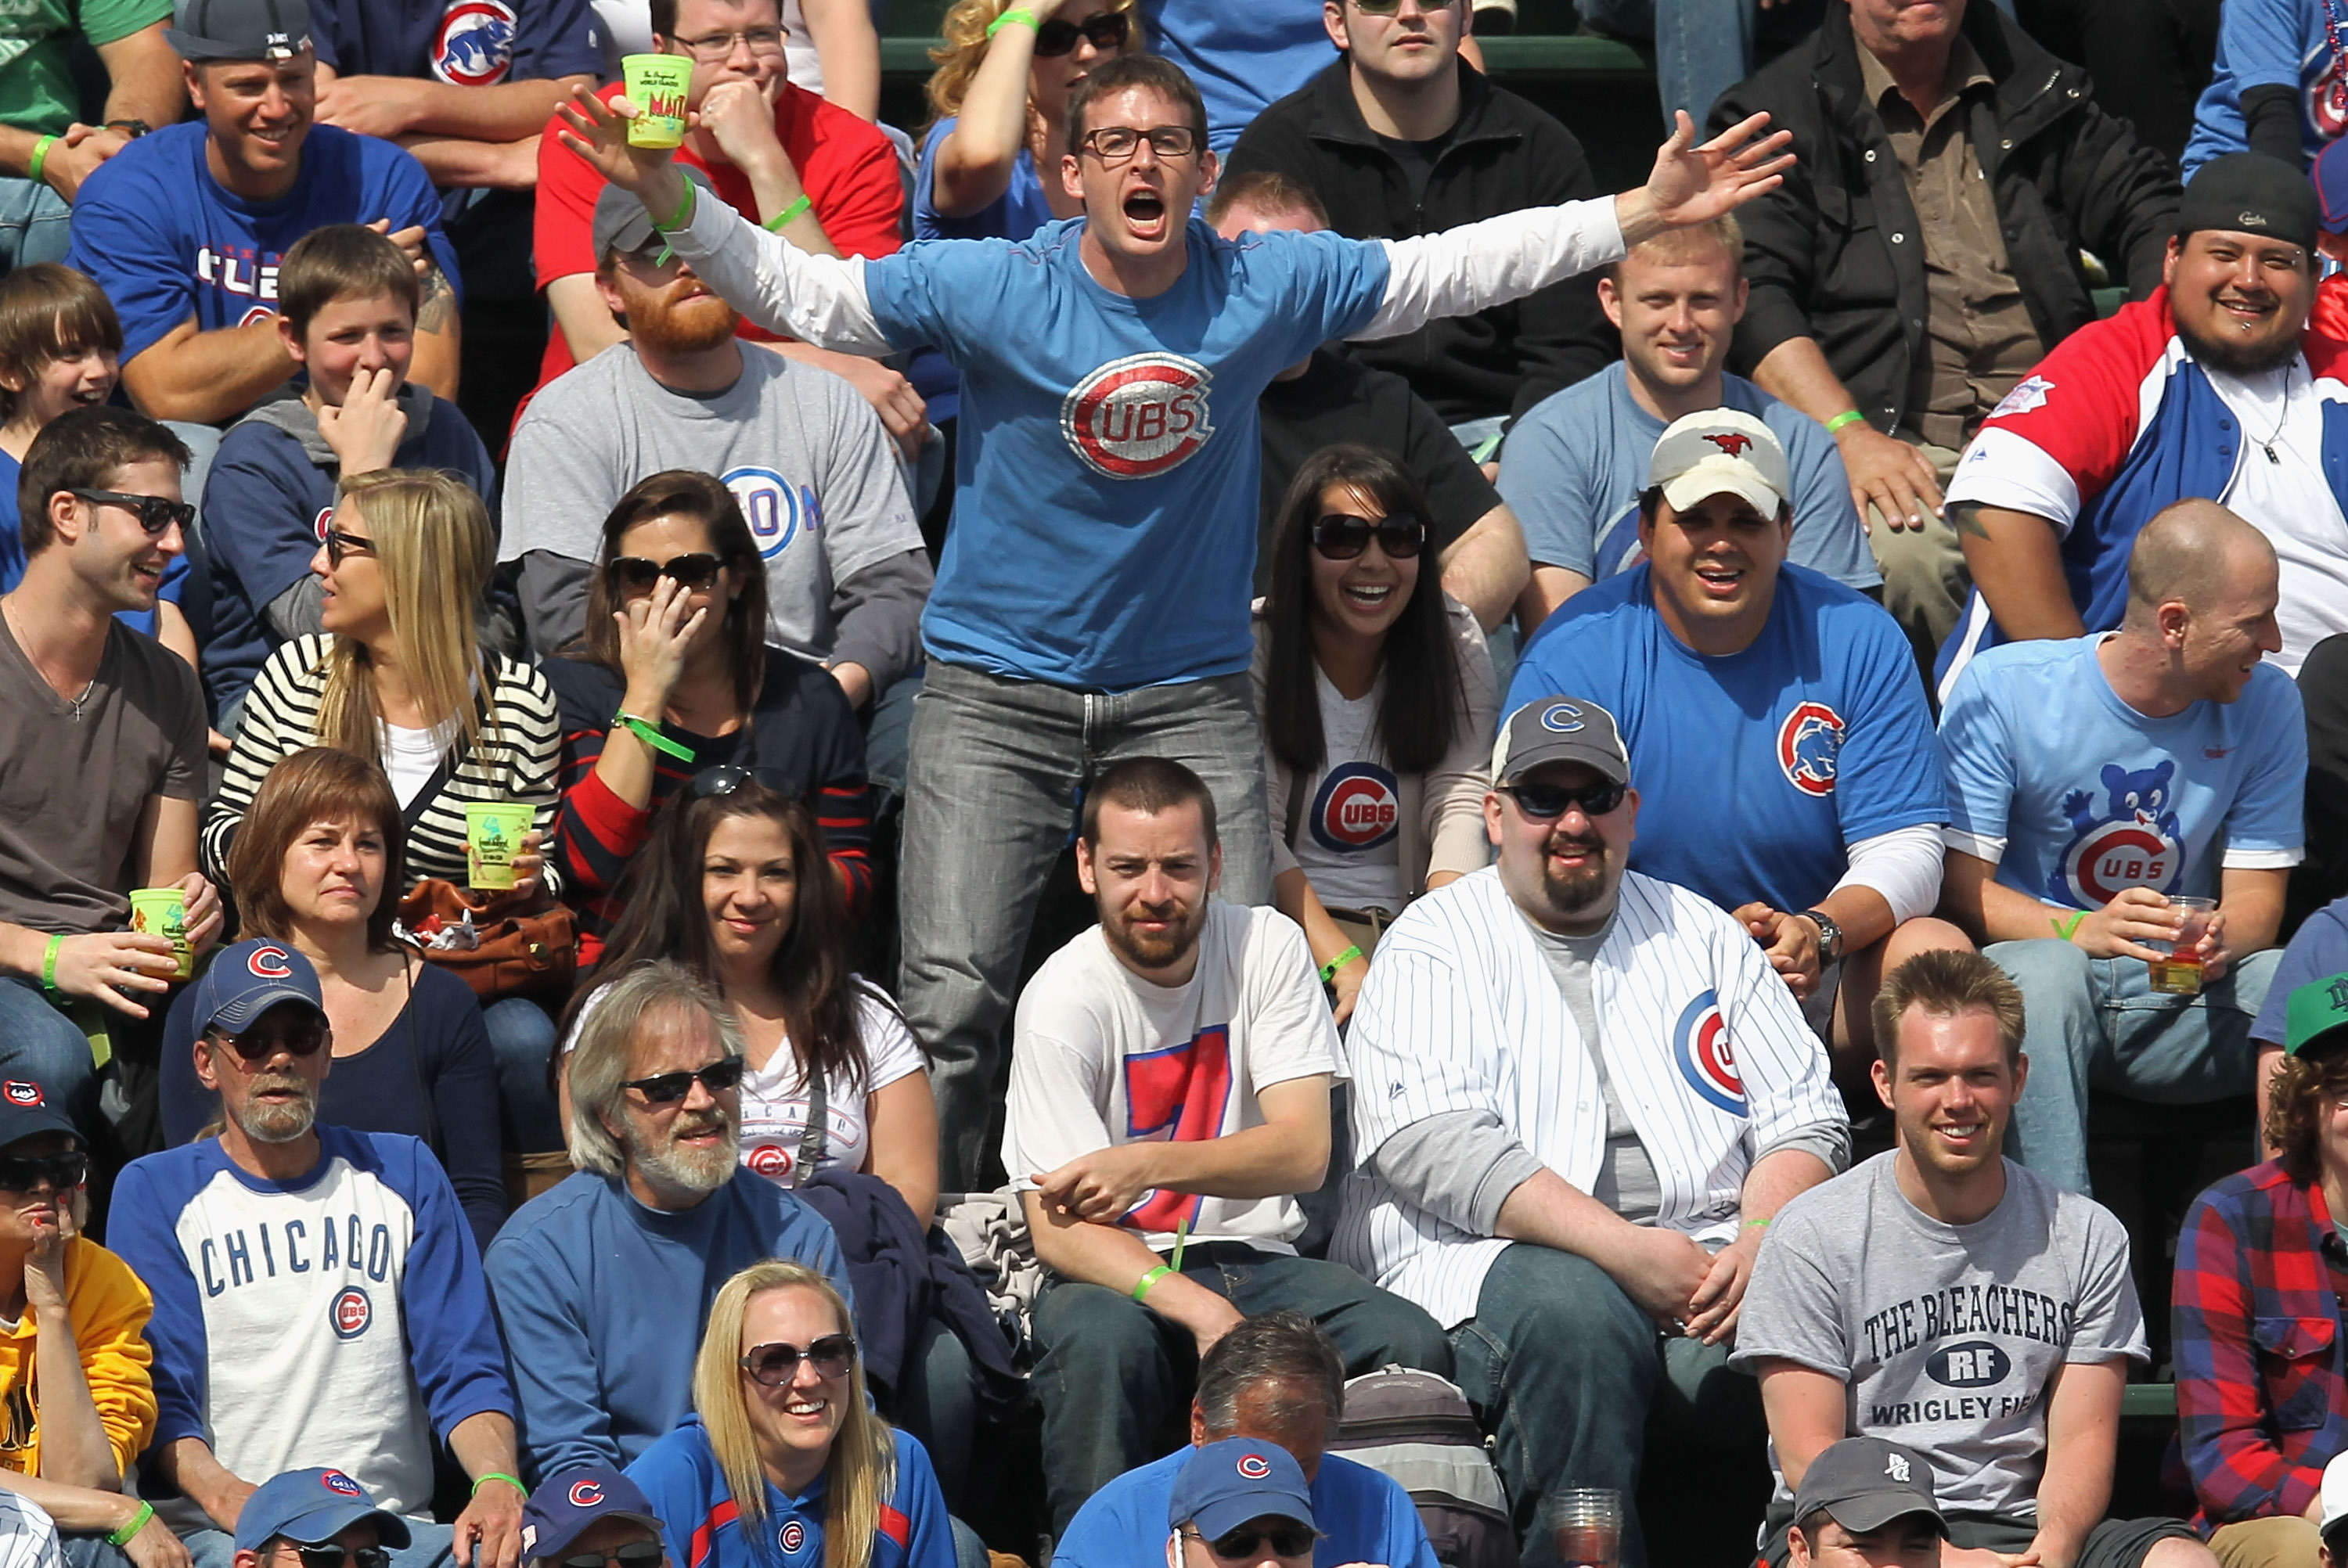 If the Cubs don't spend this offseason, Chicago baseball fandom